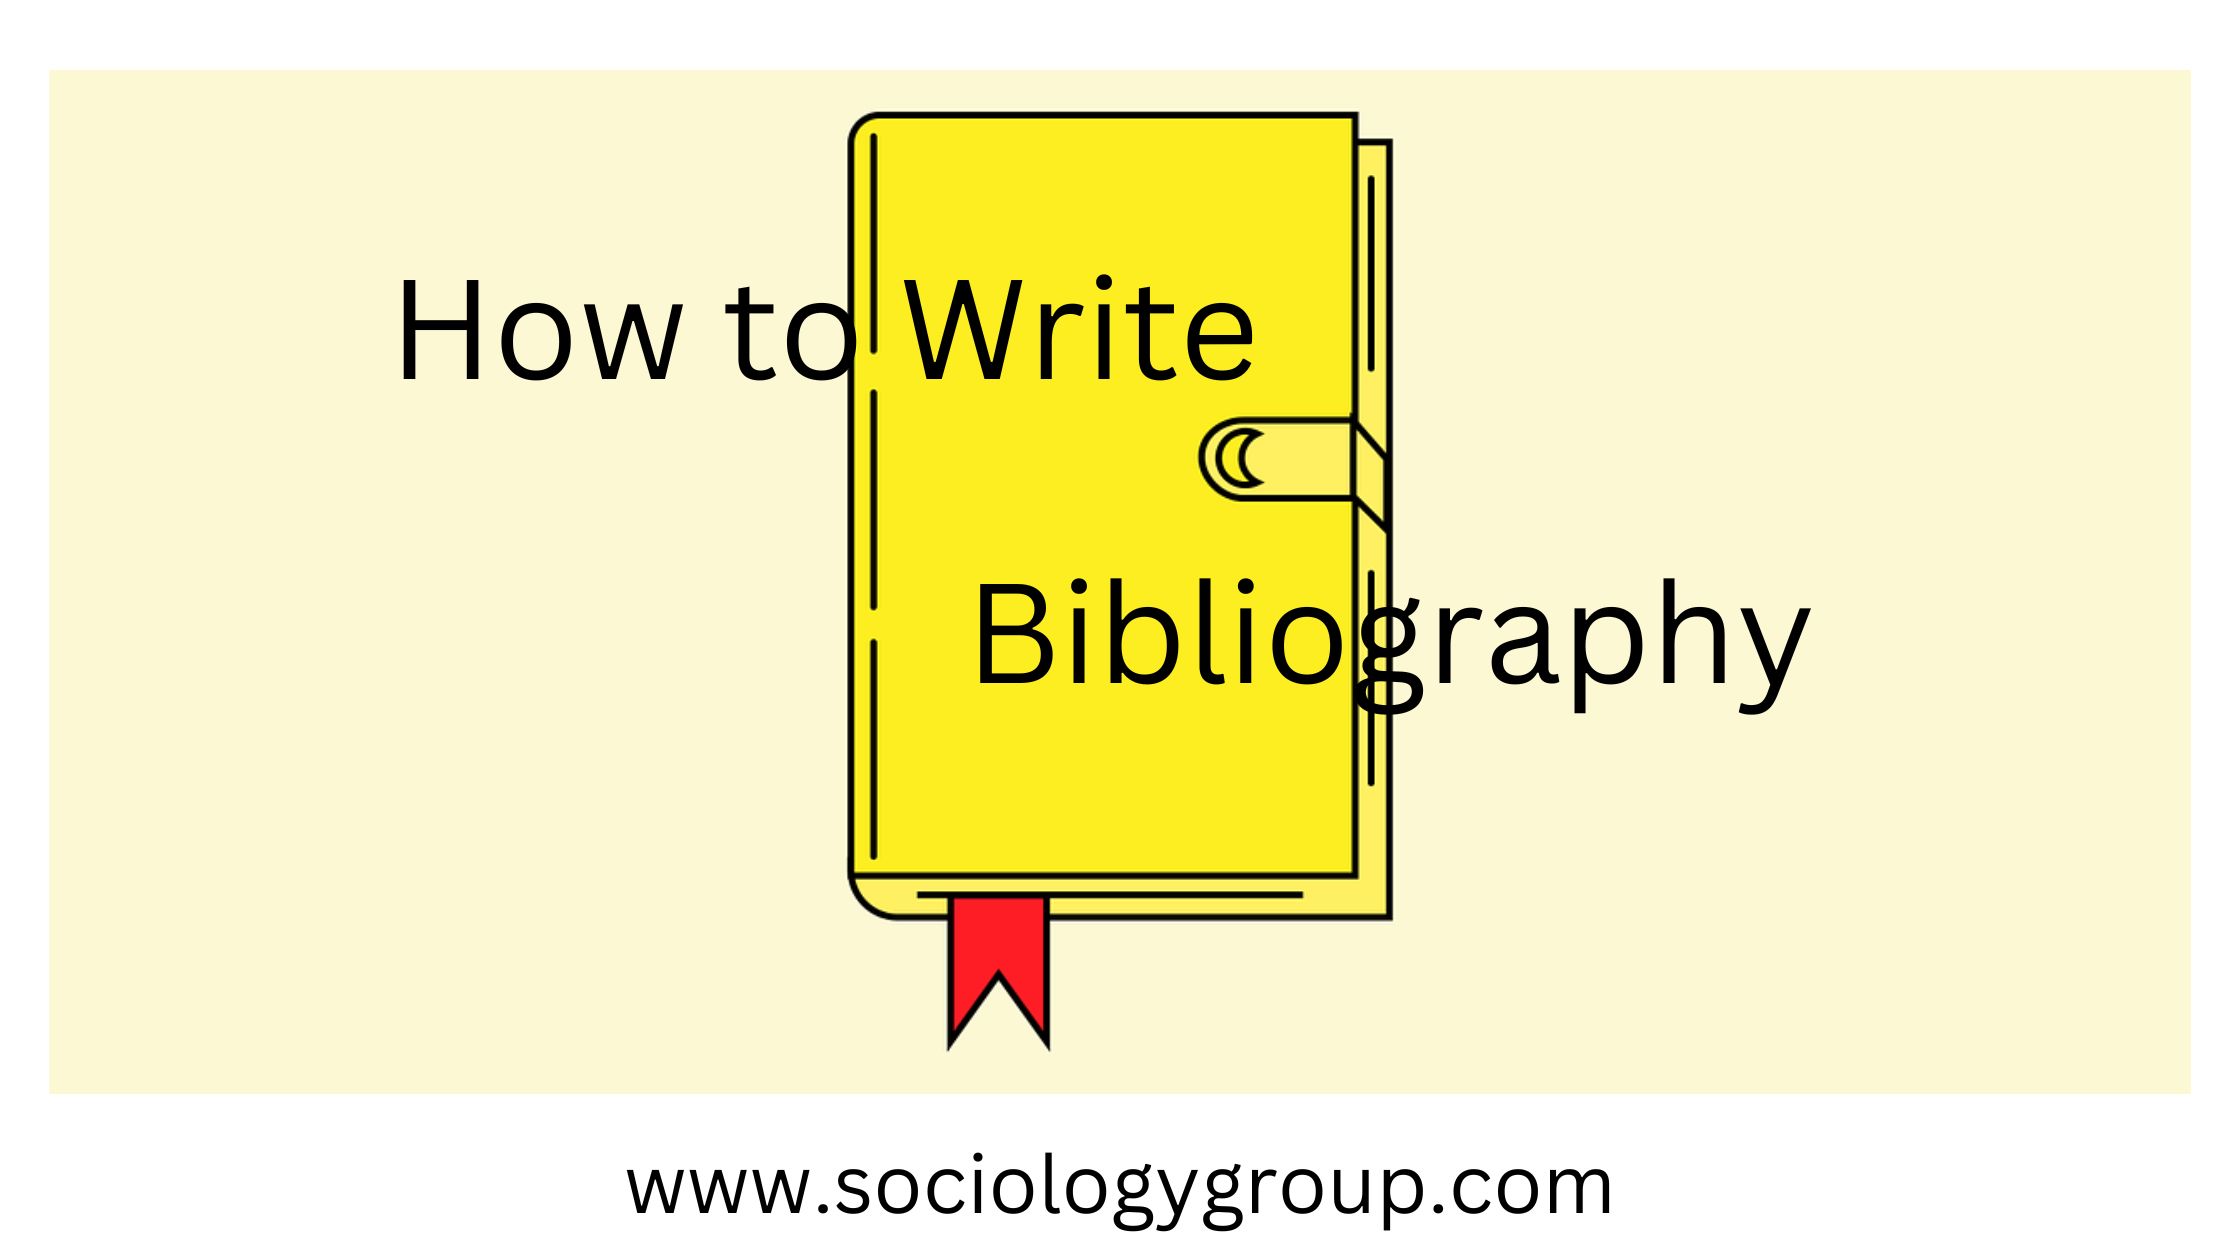 how to type a bibliography